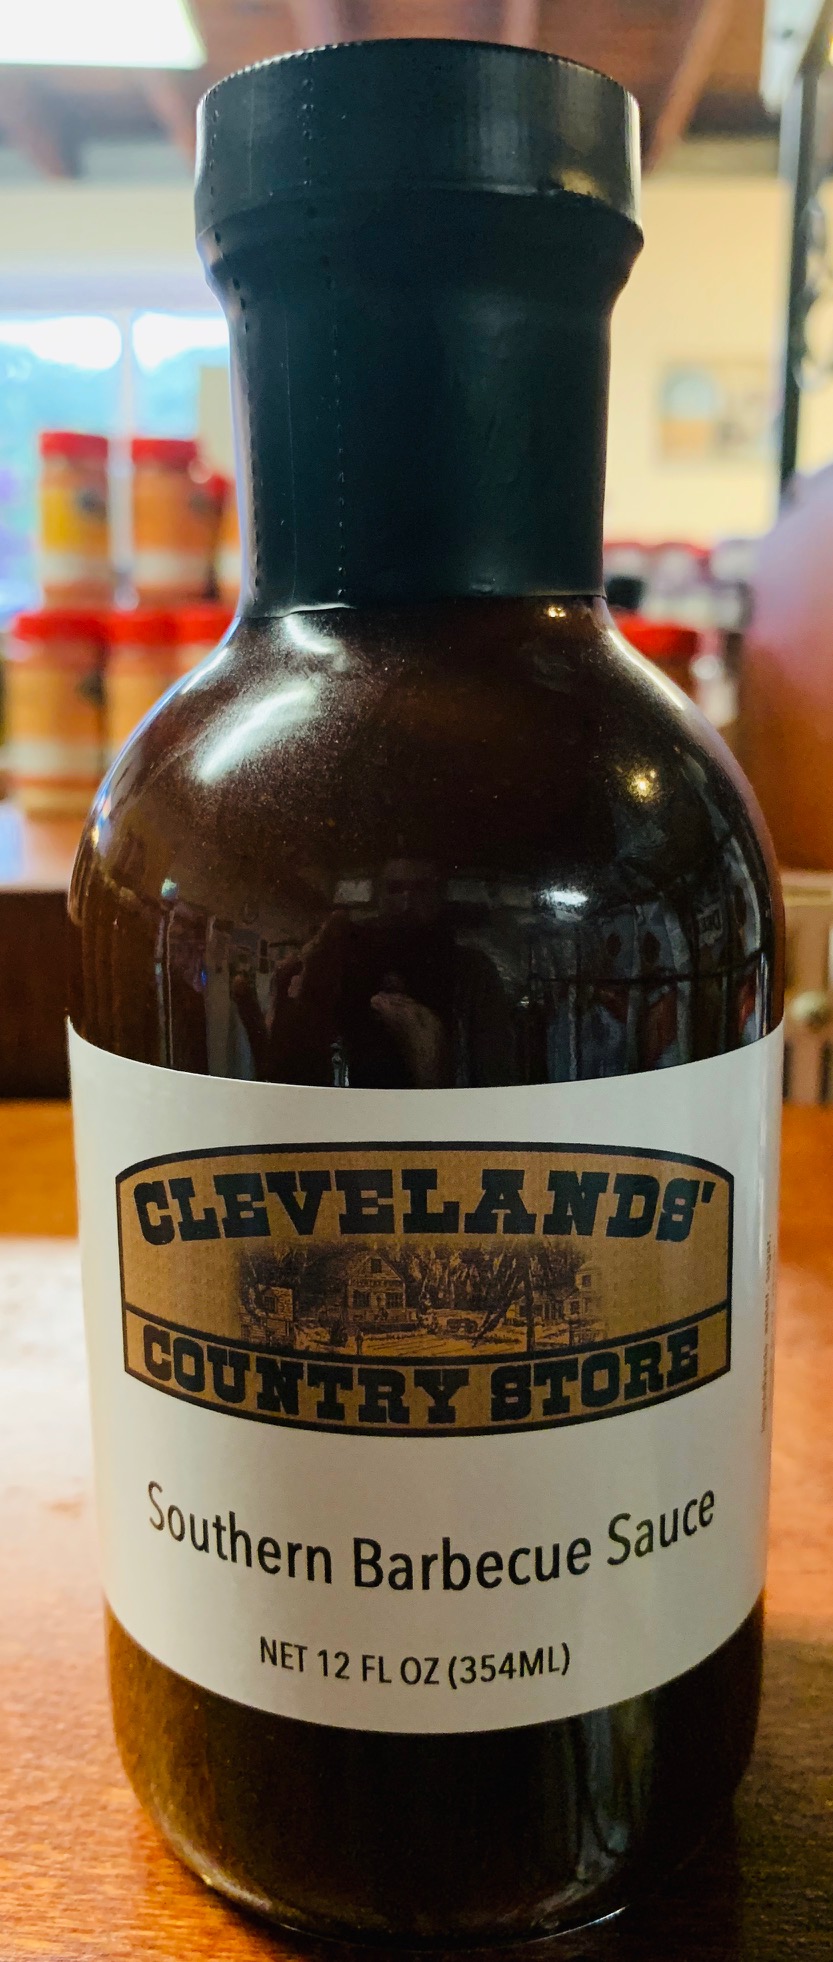 Southern Barbecue Sauce – Clevelands’ Country Store